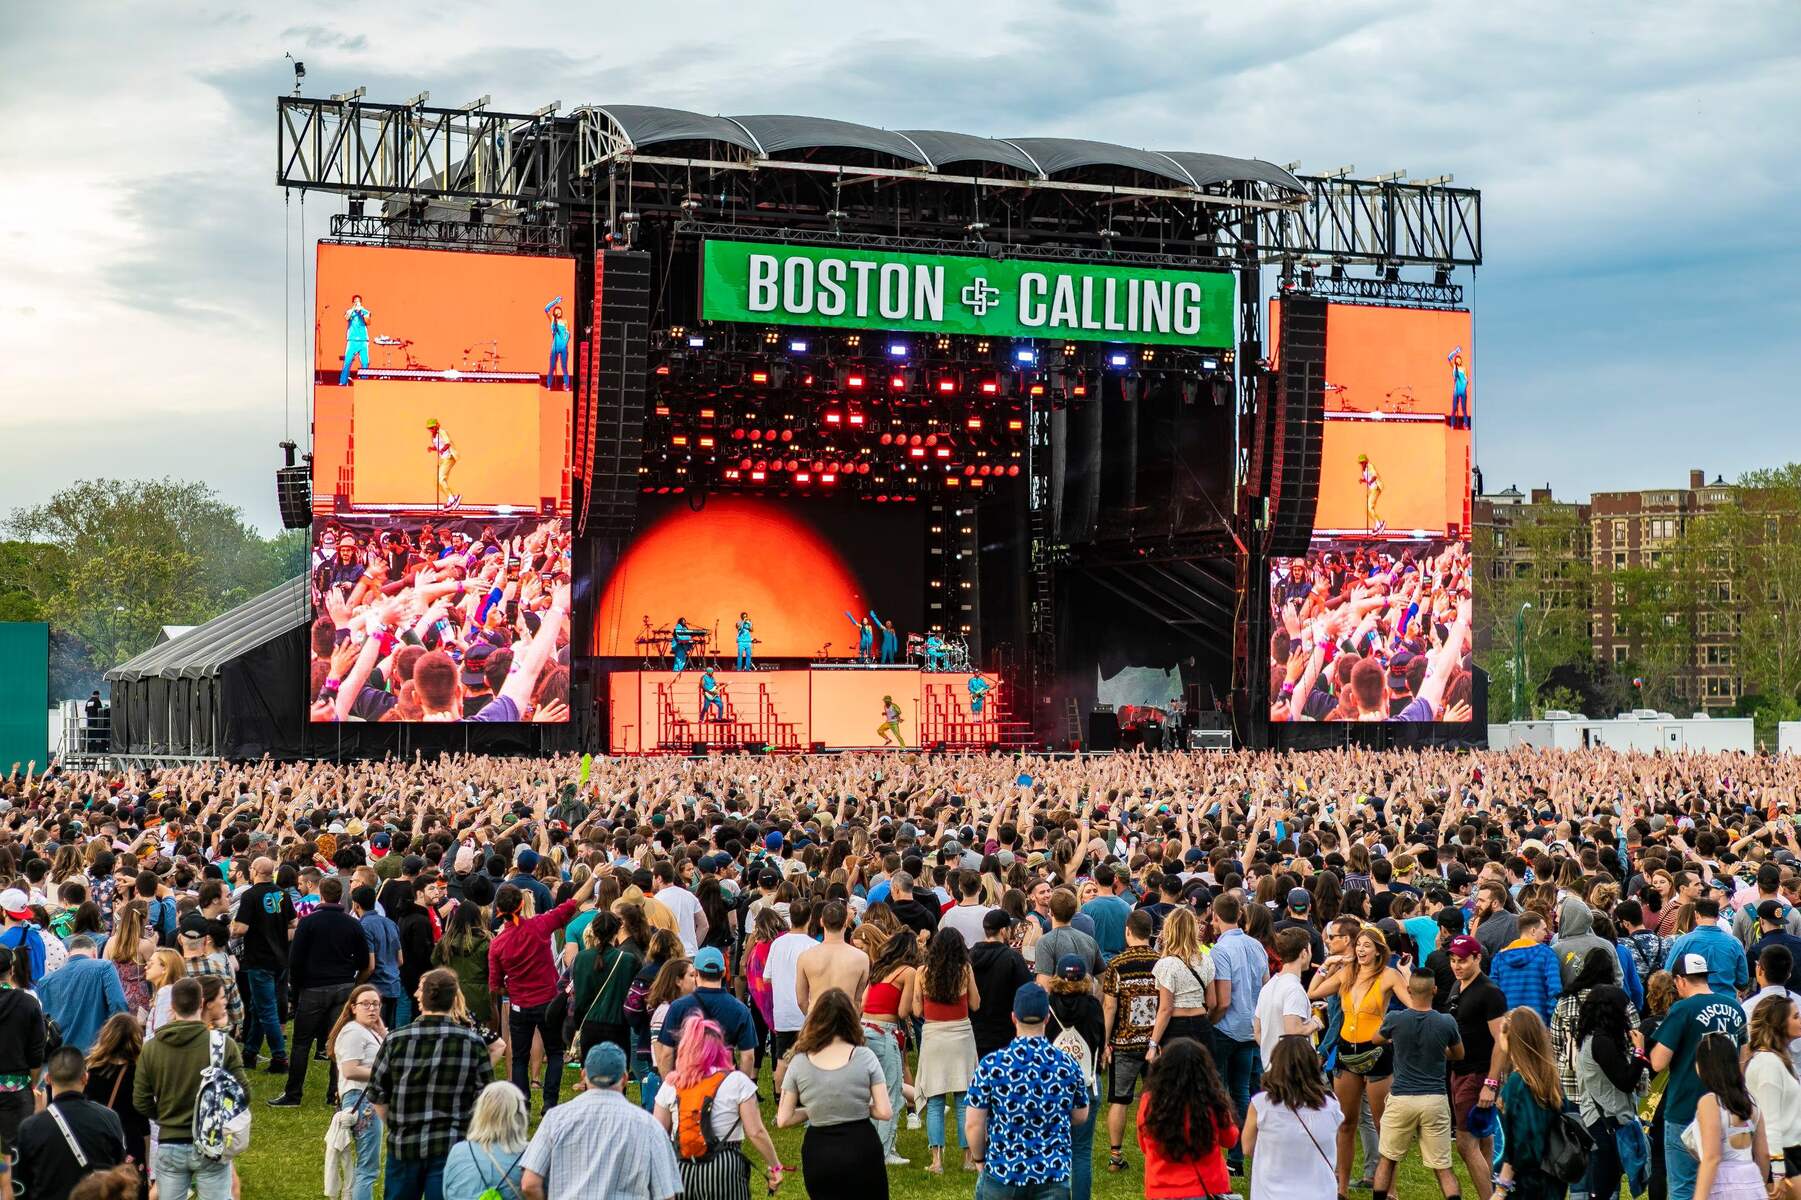 20 Facts About Boston Calling Music Festival - Facts.net